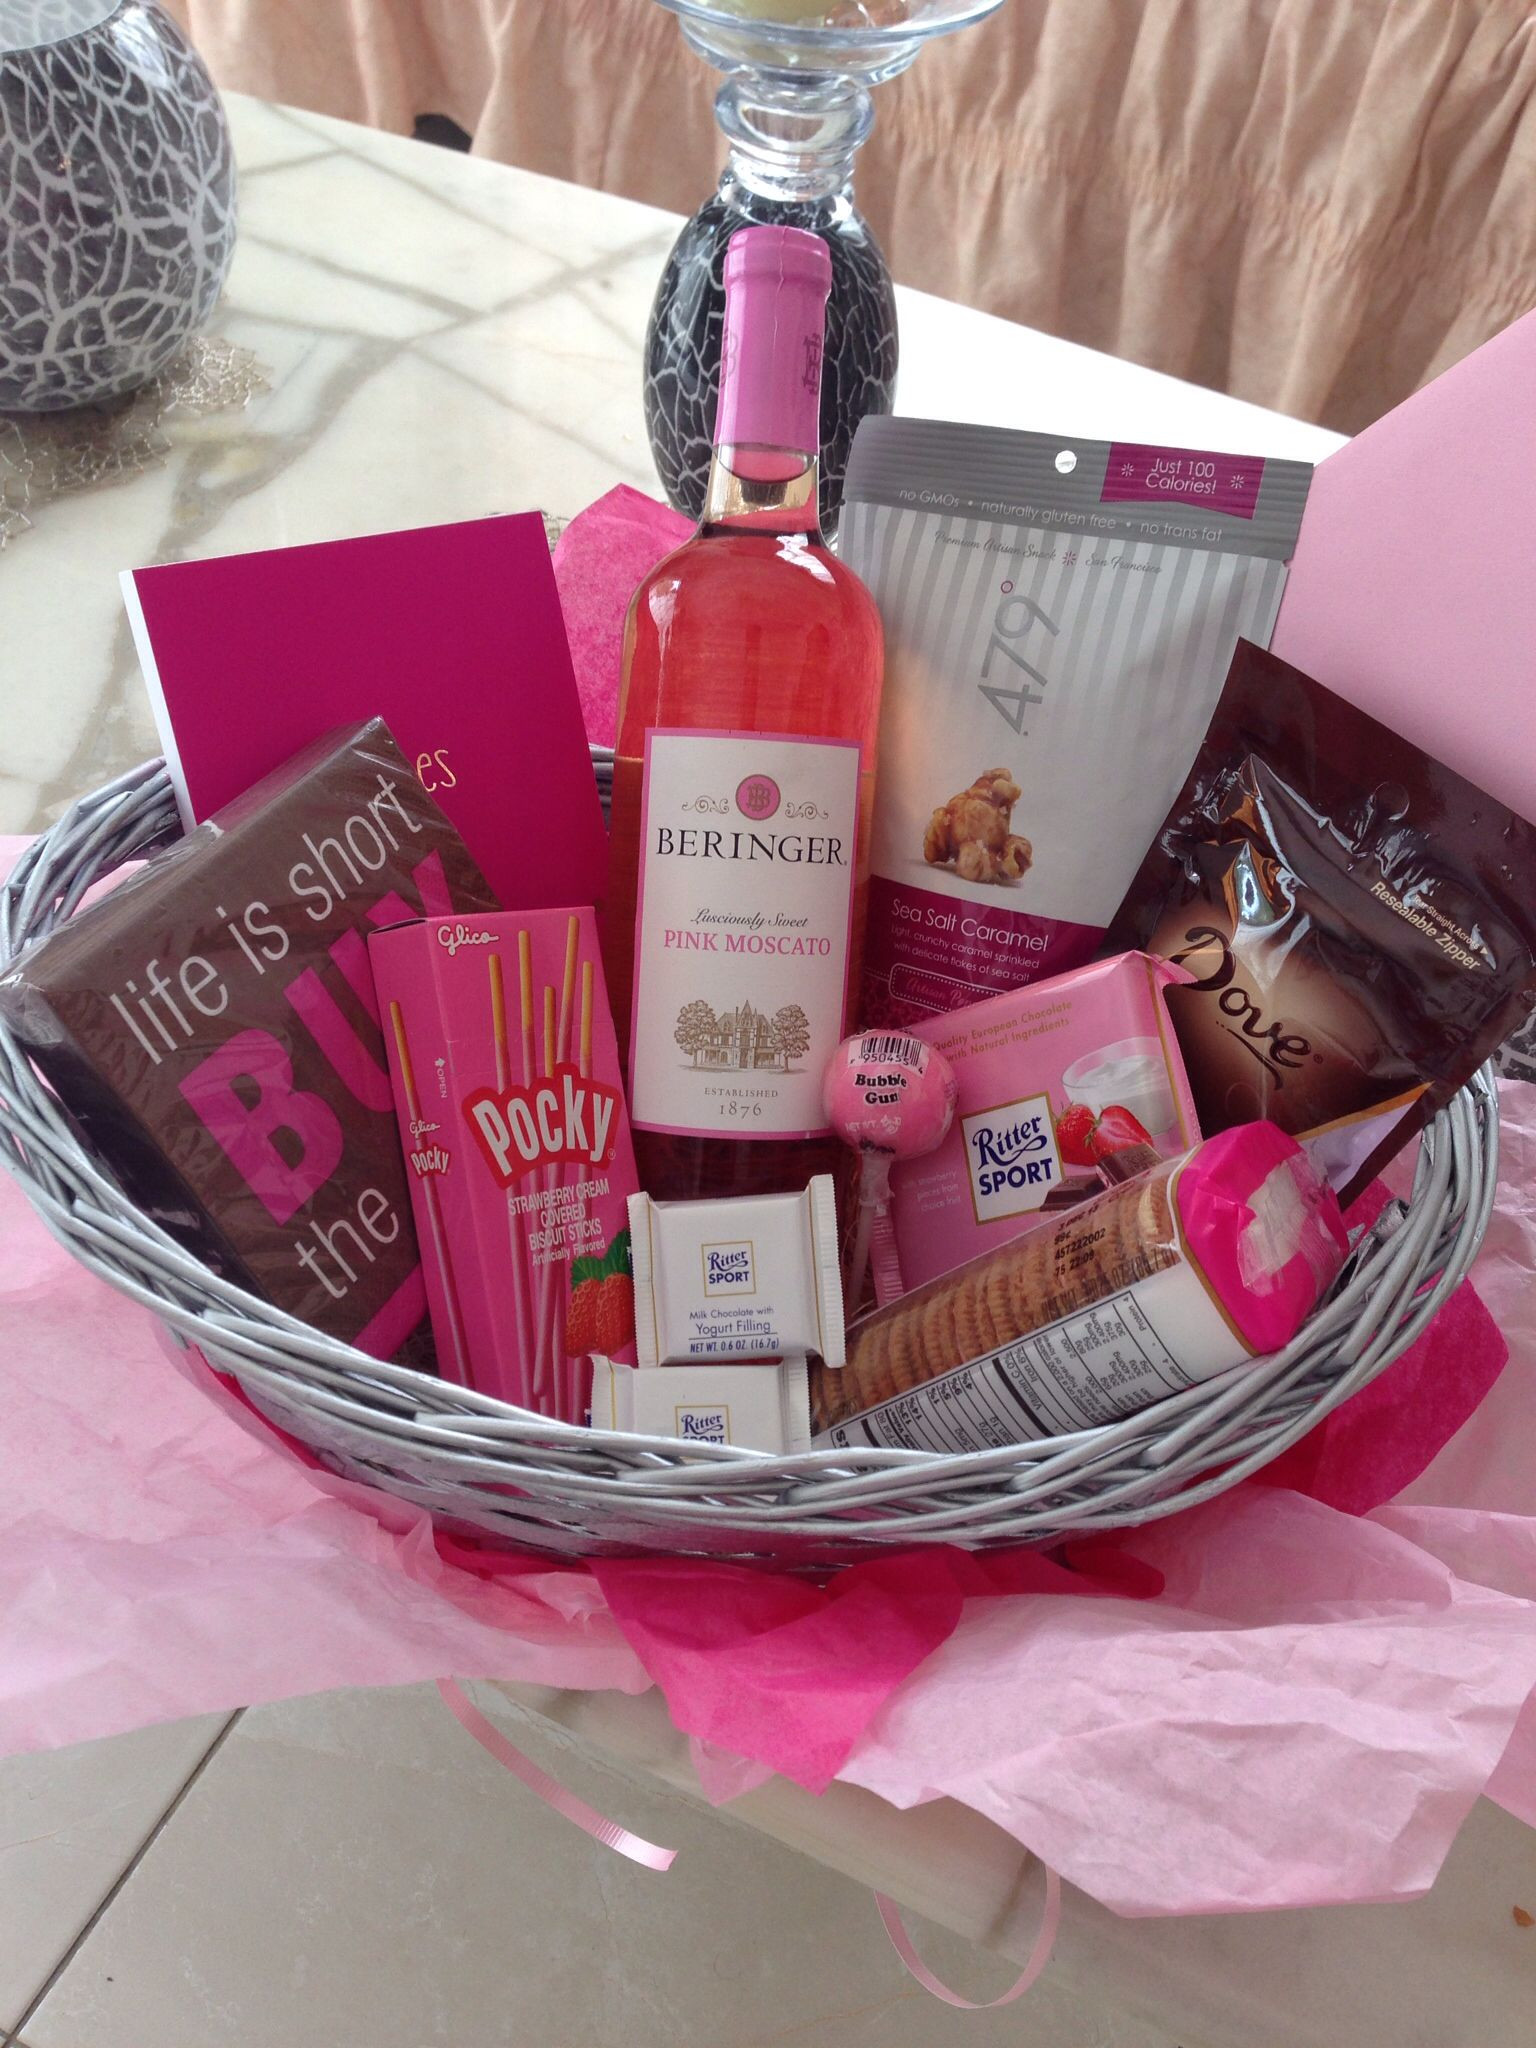 Best Gift Basket Ideas
 The best friend basket with pink moscato